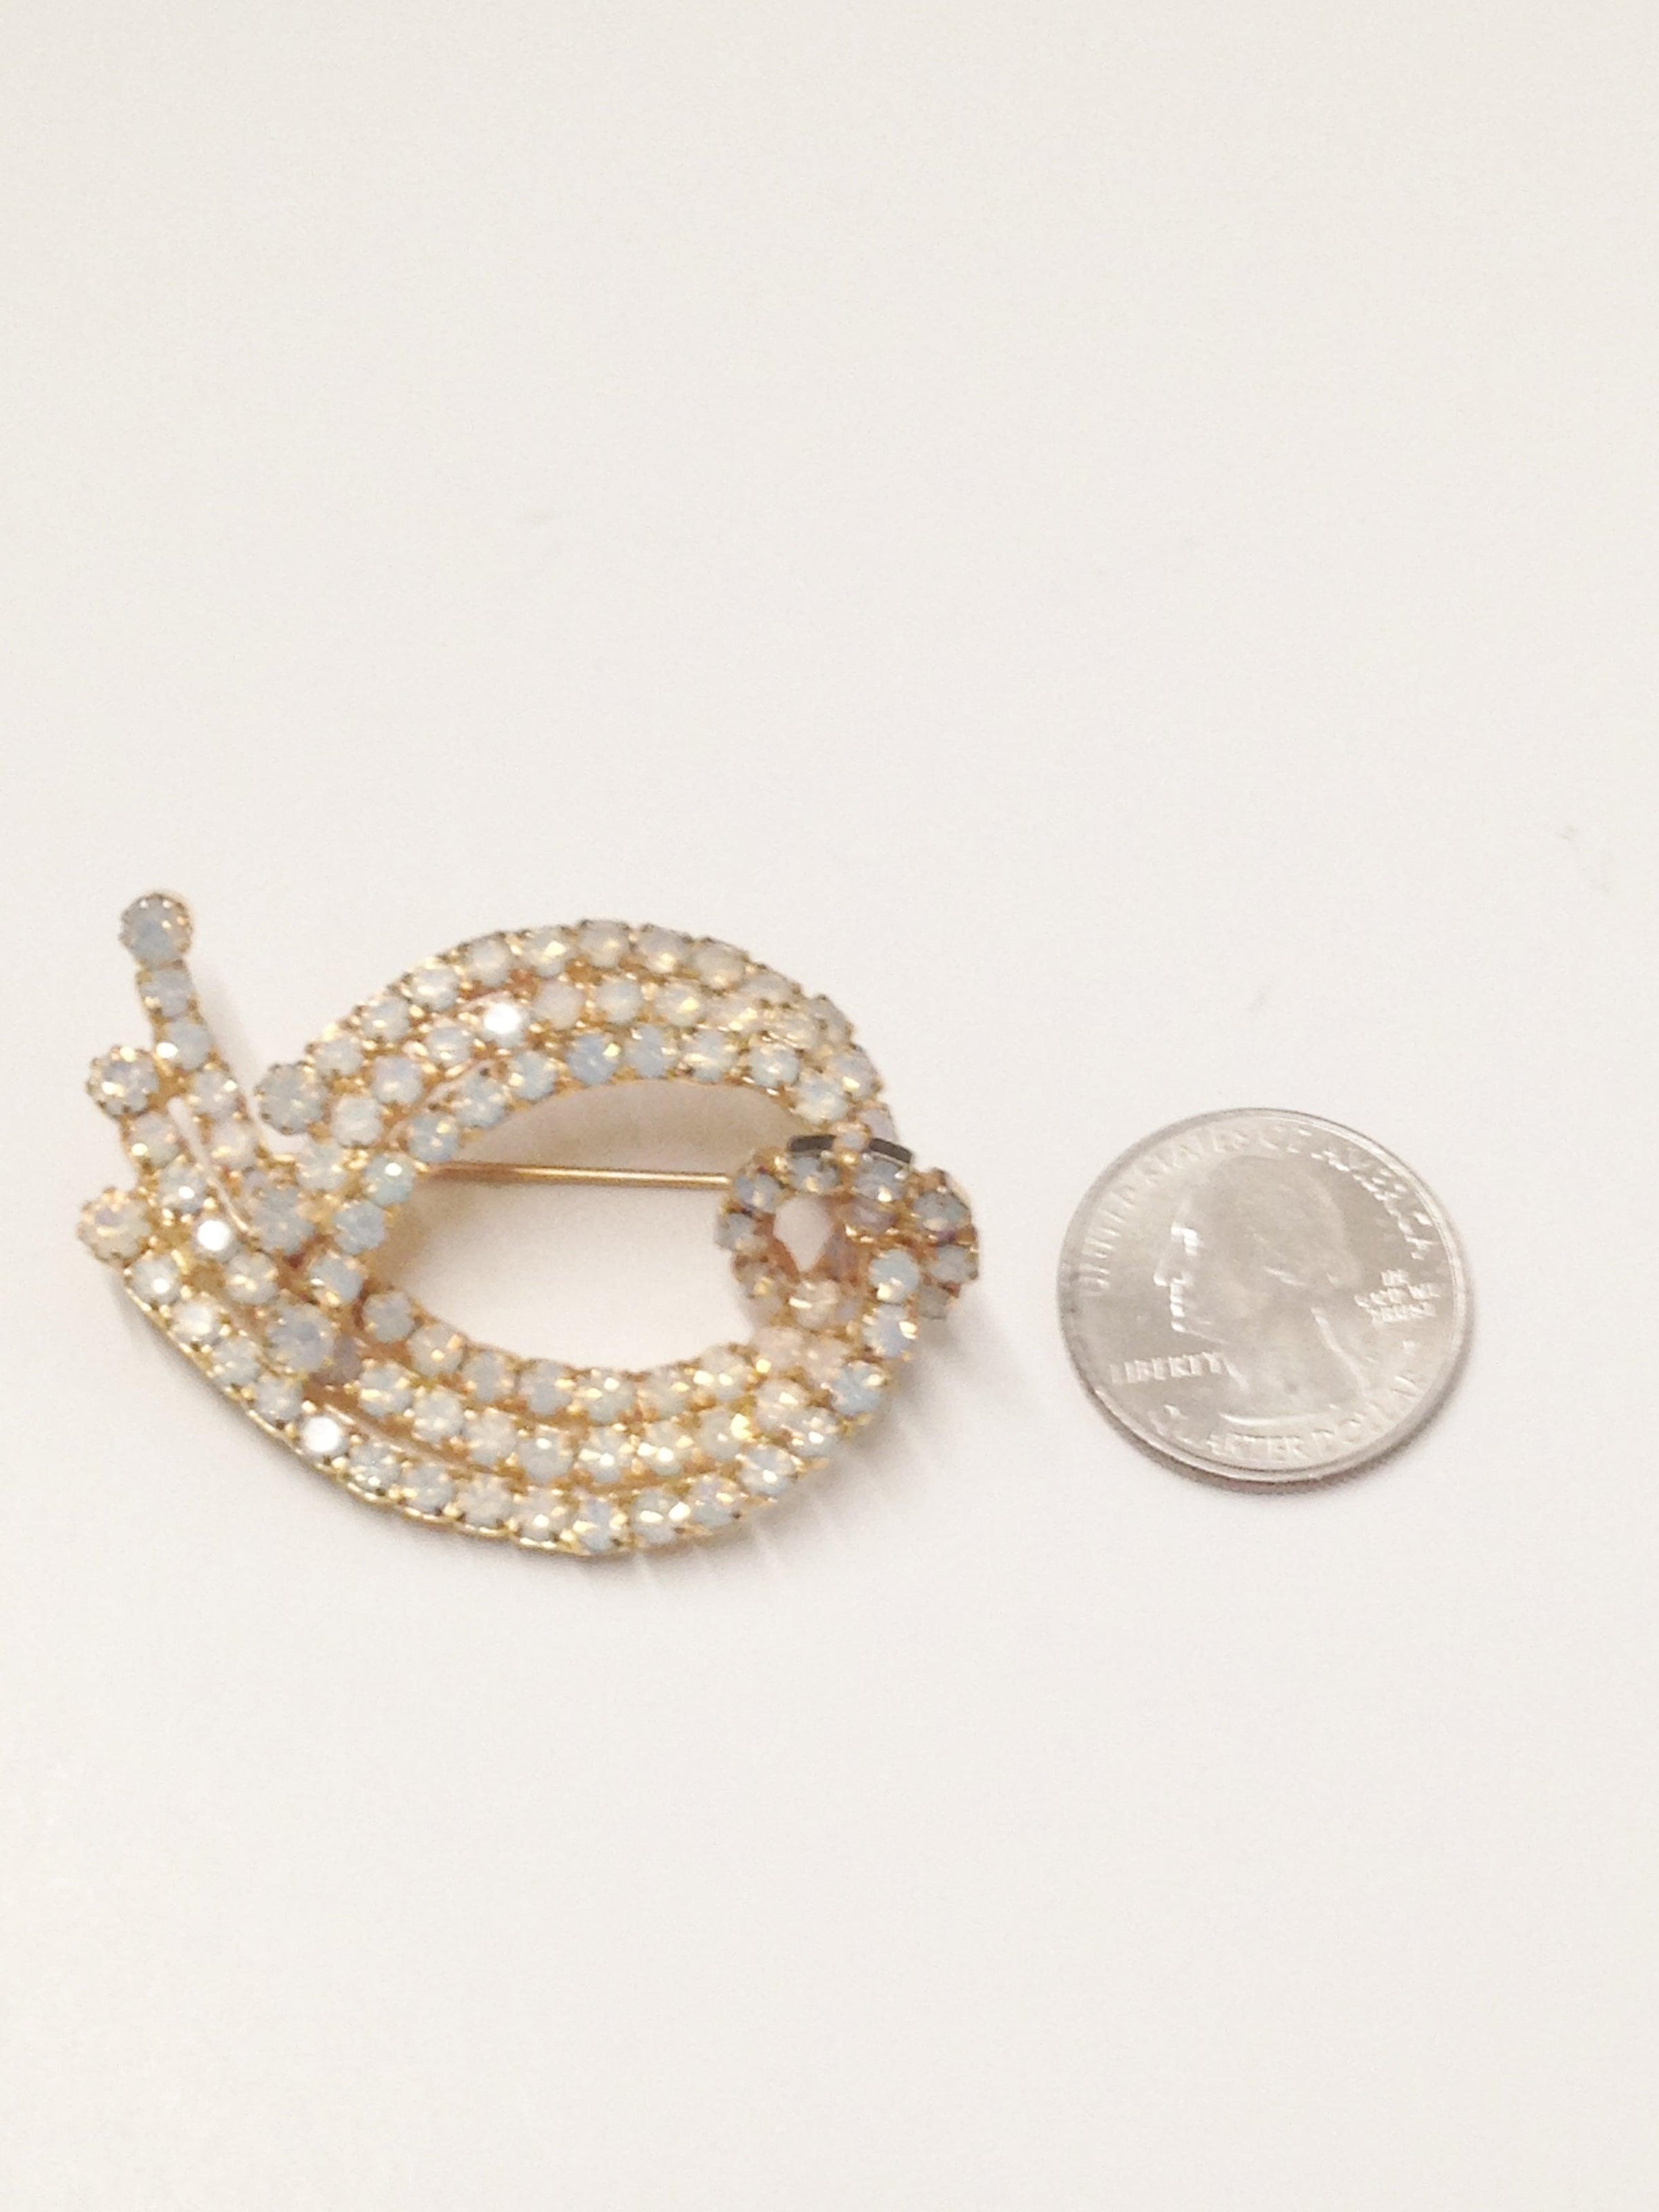 Vintage Opaque White Rhinestone Brooch Pin - Hers and His Treasures